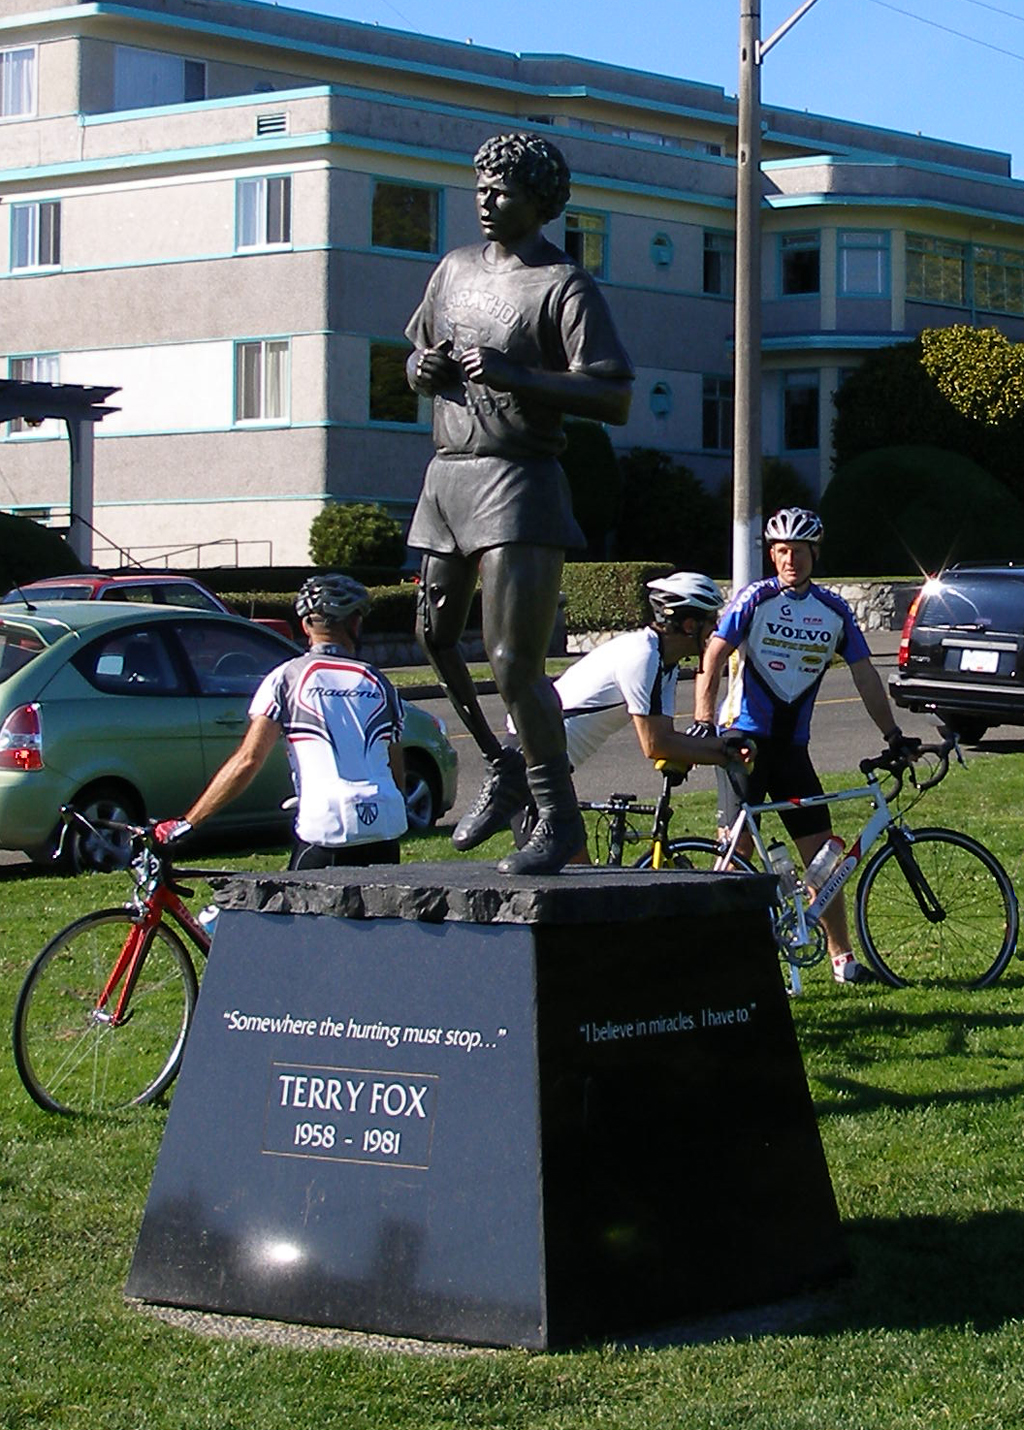 End of the Cancer Ride - Terry Fox Statue